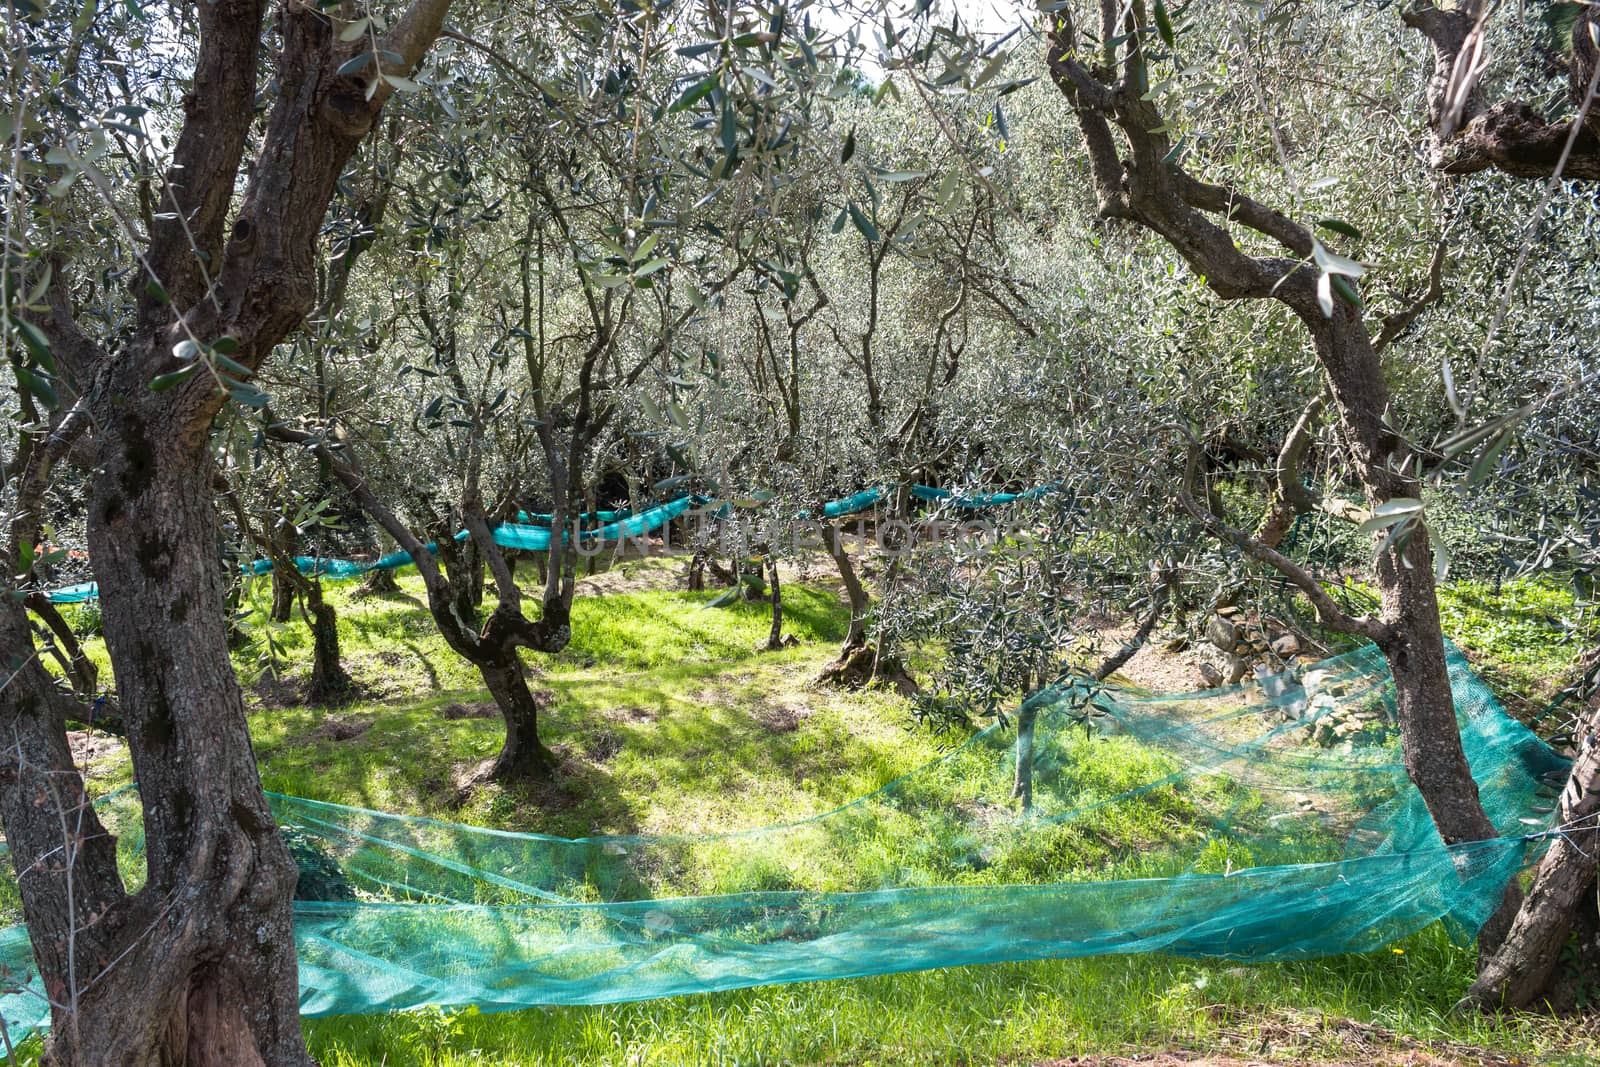 Garden of olives during the harvesting done with networks